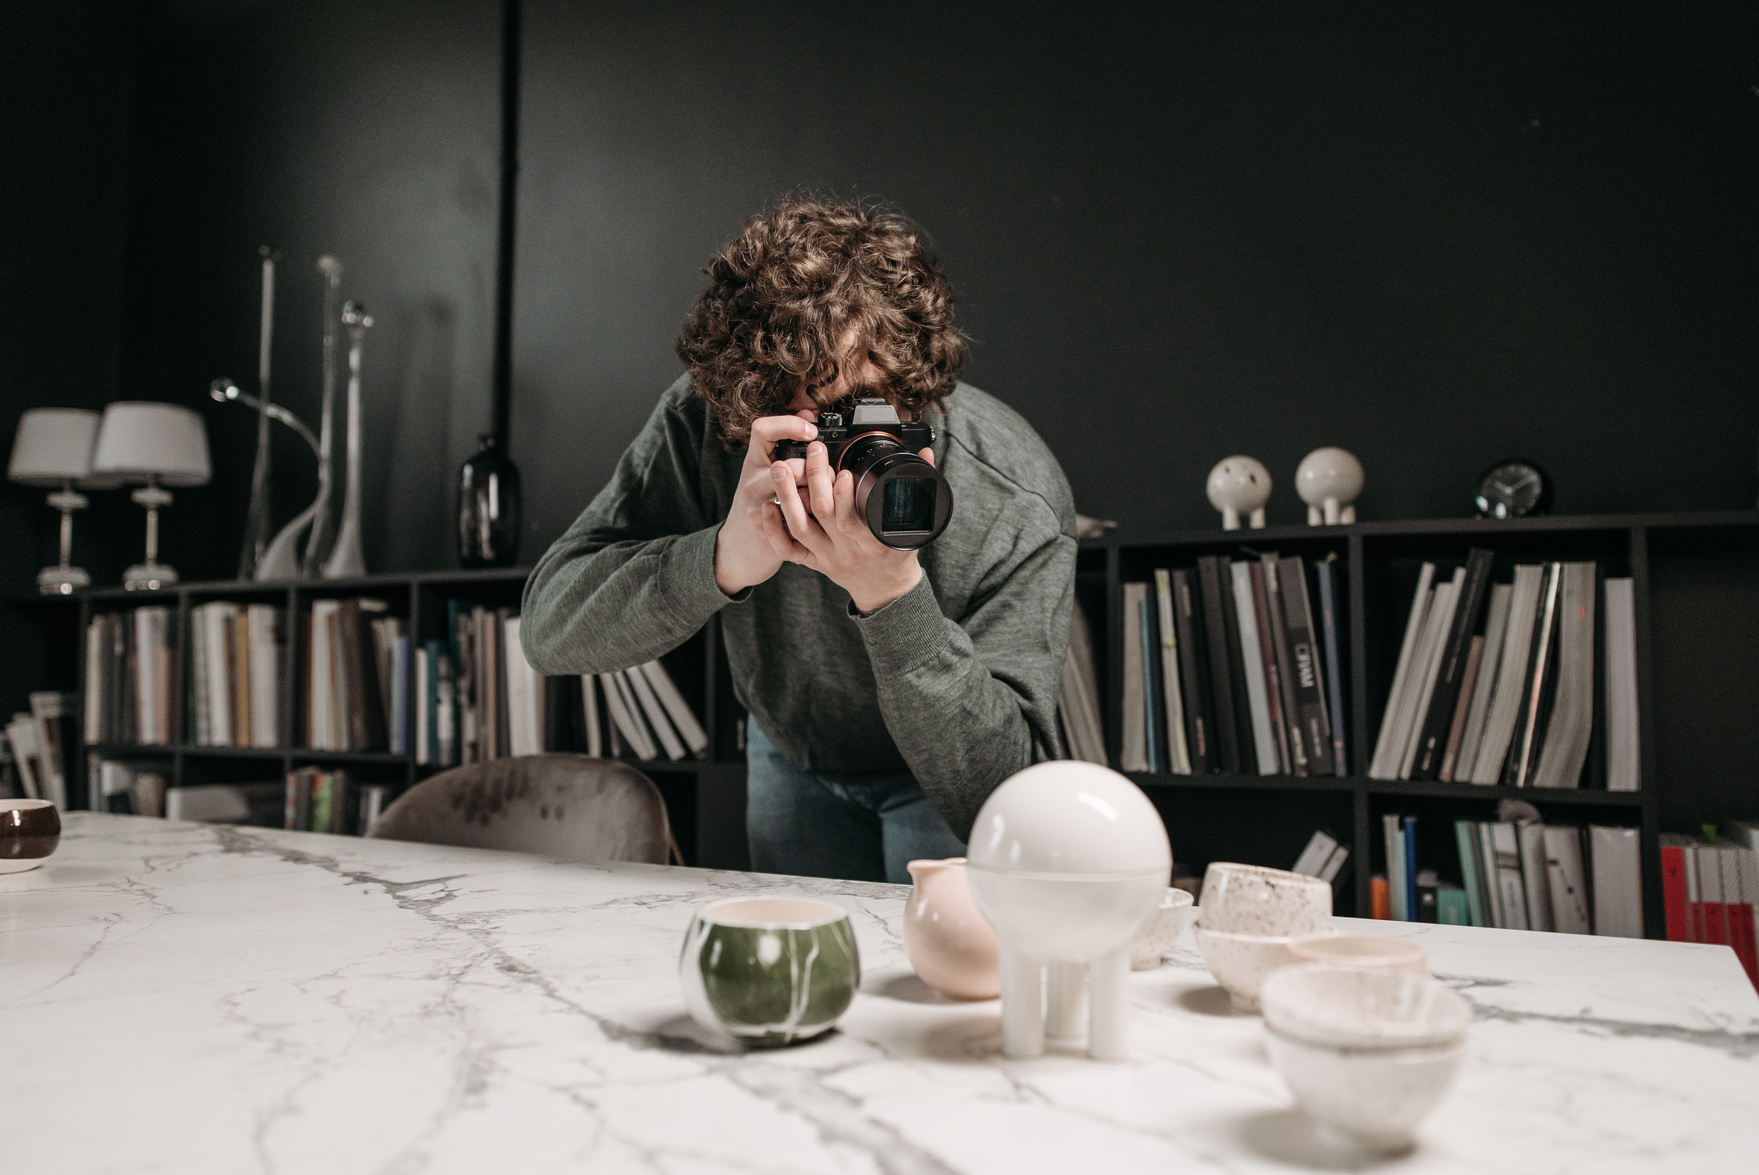 A Photographer Taking Photo of Ceramic Products